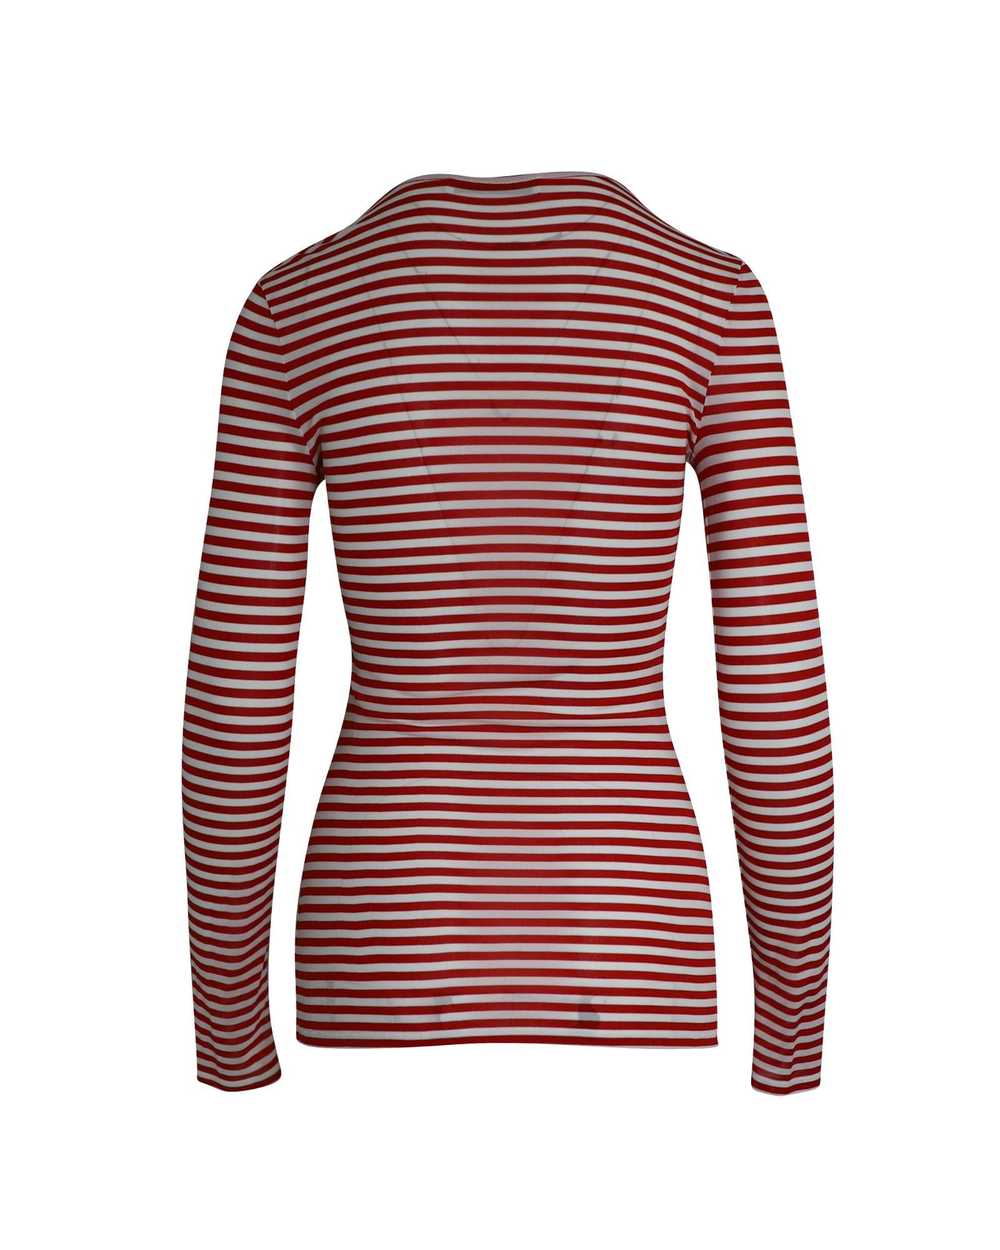 Max Mara Striped Long Sleeve Top in Red and White… - image 3